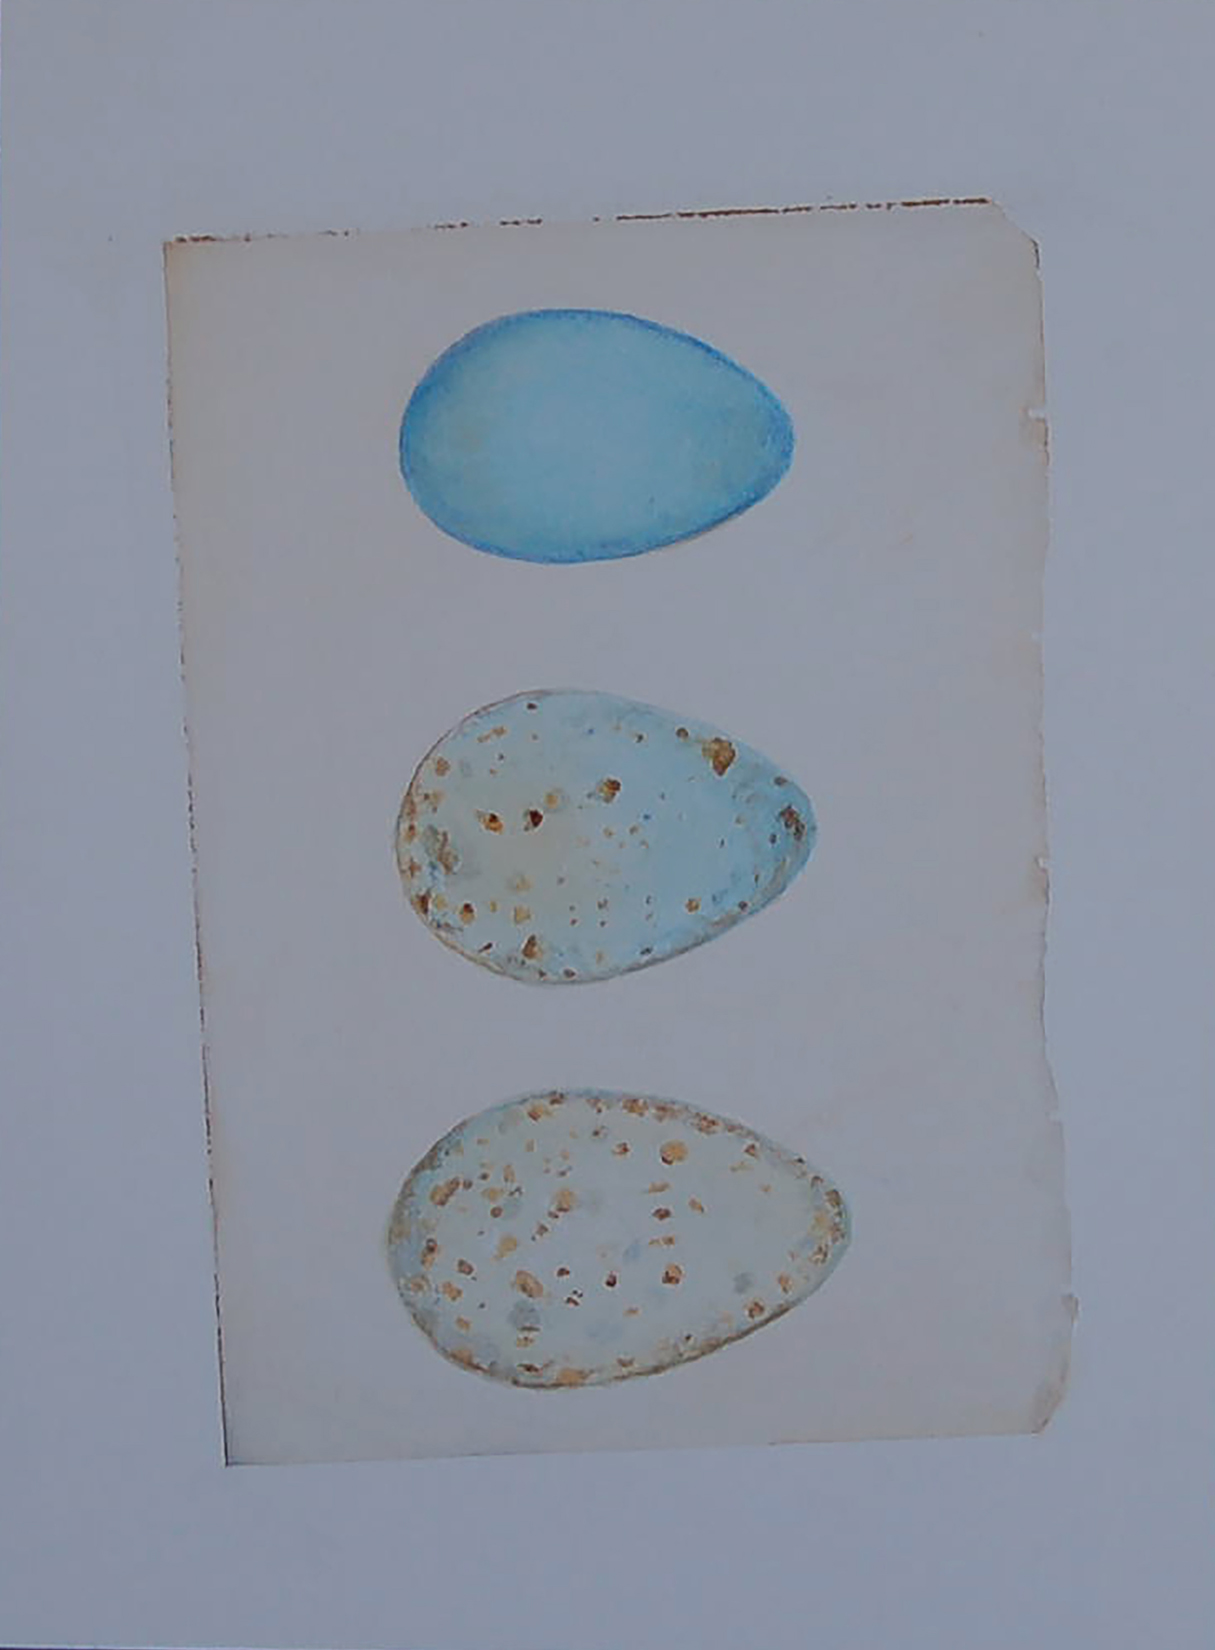 Three Speckled Eggs